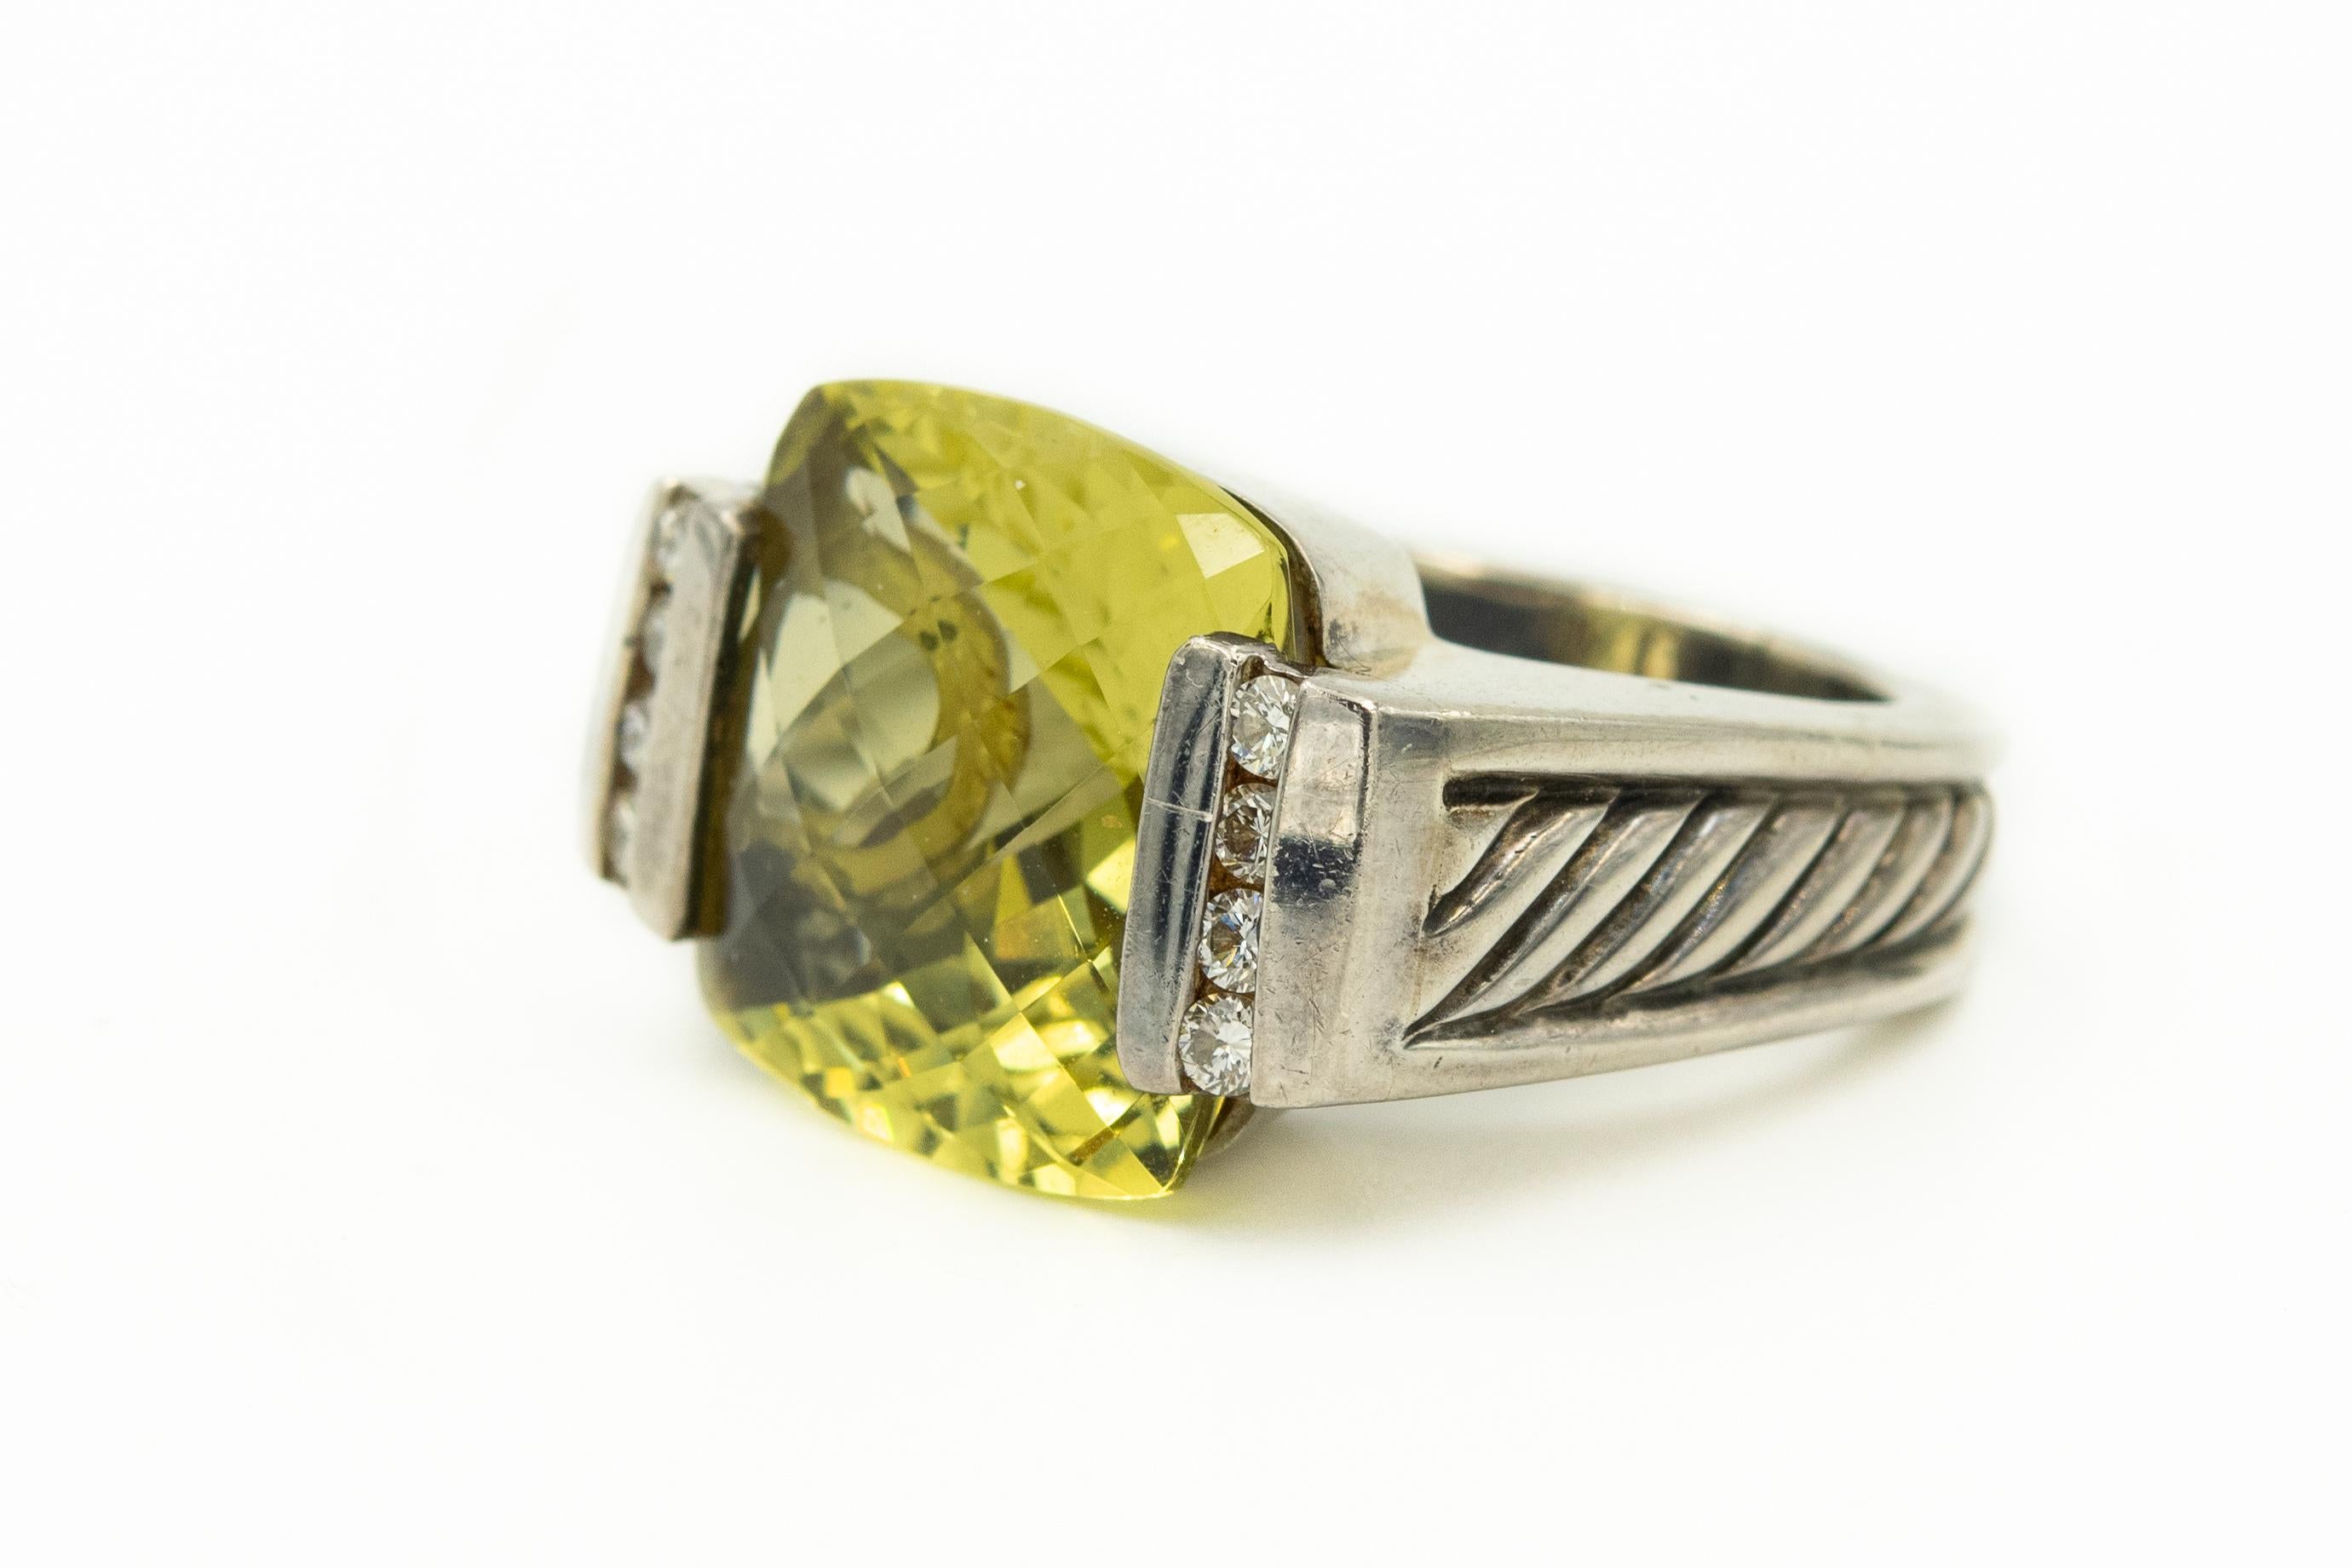 David Yurman sterling silver cocktail ring from the Deco collection. Features a cushion-shaped lemon quartz center with channel-set round brilliant diamonds at sides and cable motif throughout shank. Size: 5.5; can be resized. Hallmarked: 585, 925